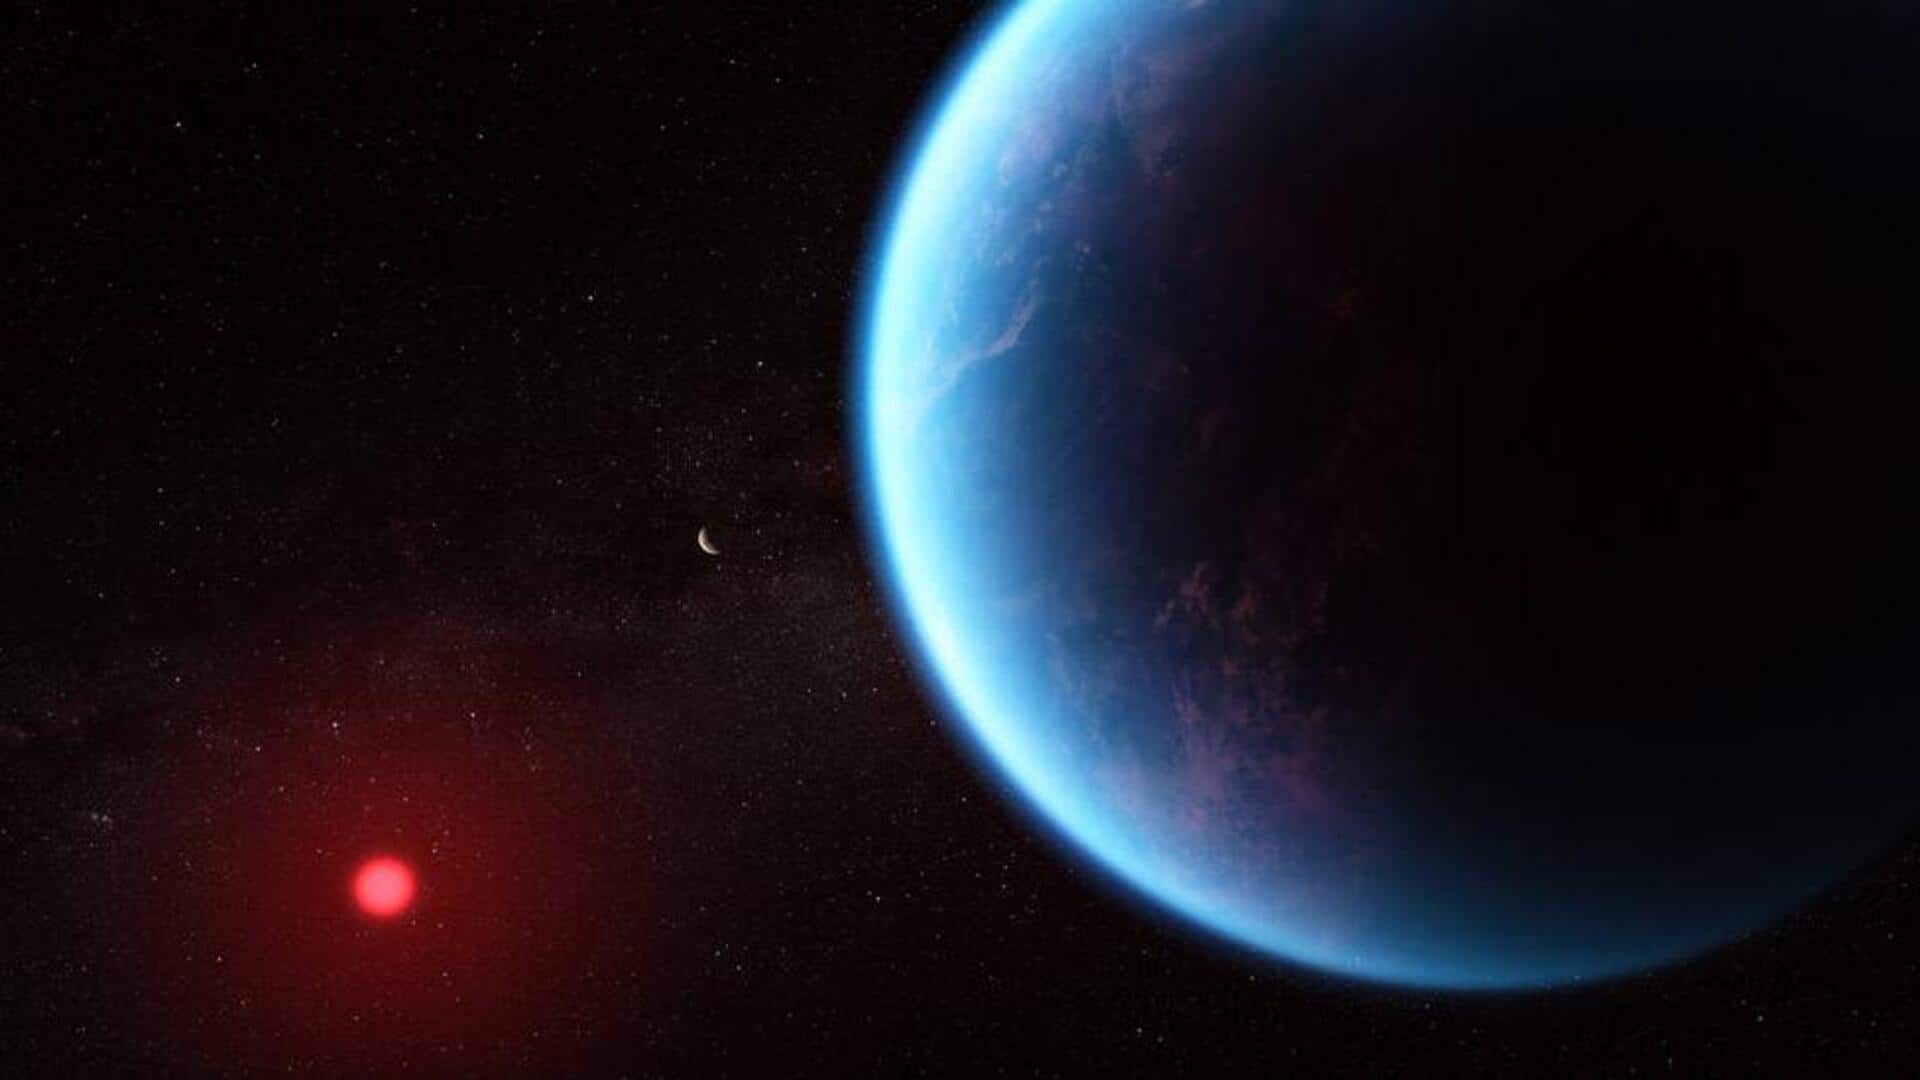 JWST detects life-supporting elements in the atmosphere of an exoplanet